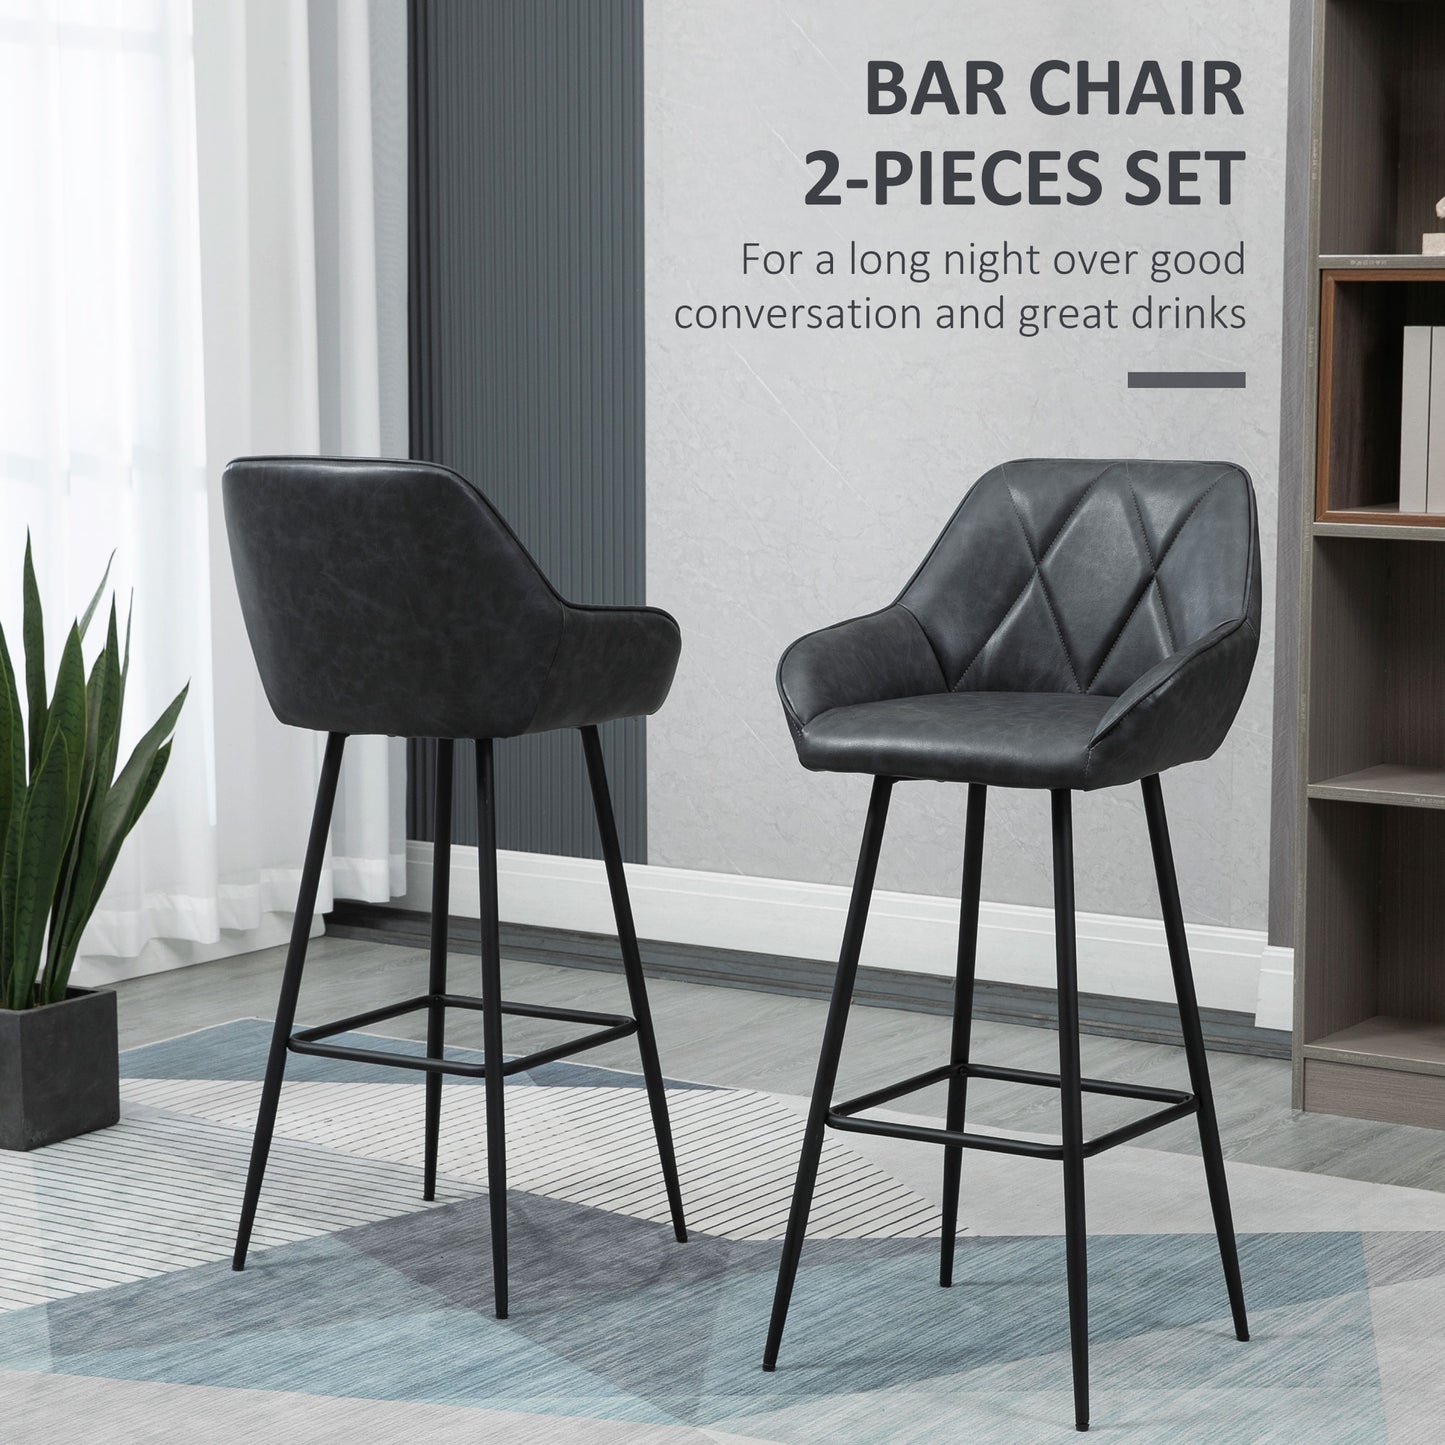 Retro Bar Stools Set of 2, Bar Chairs with Footrest, 30" (76 cm.) Counter Stools with Backs and Steel Legs, for Kitchen Island and Home Bar, Black